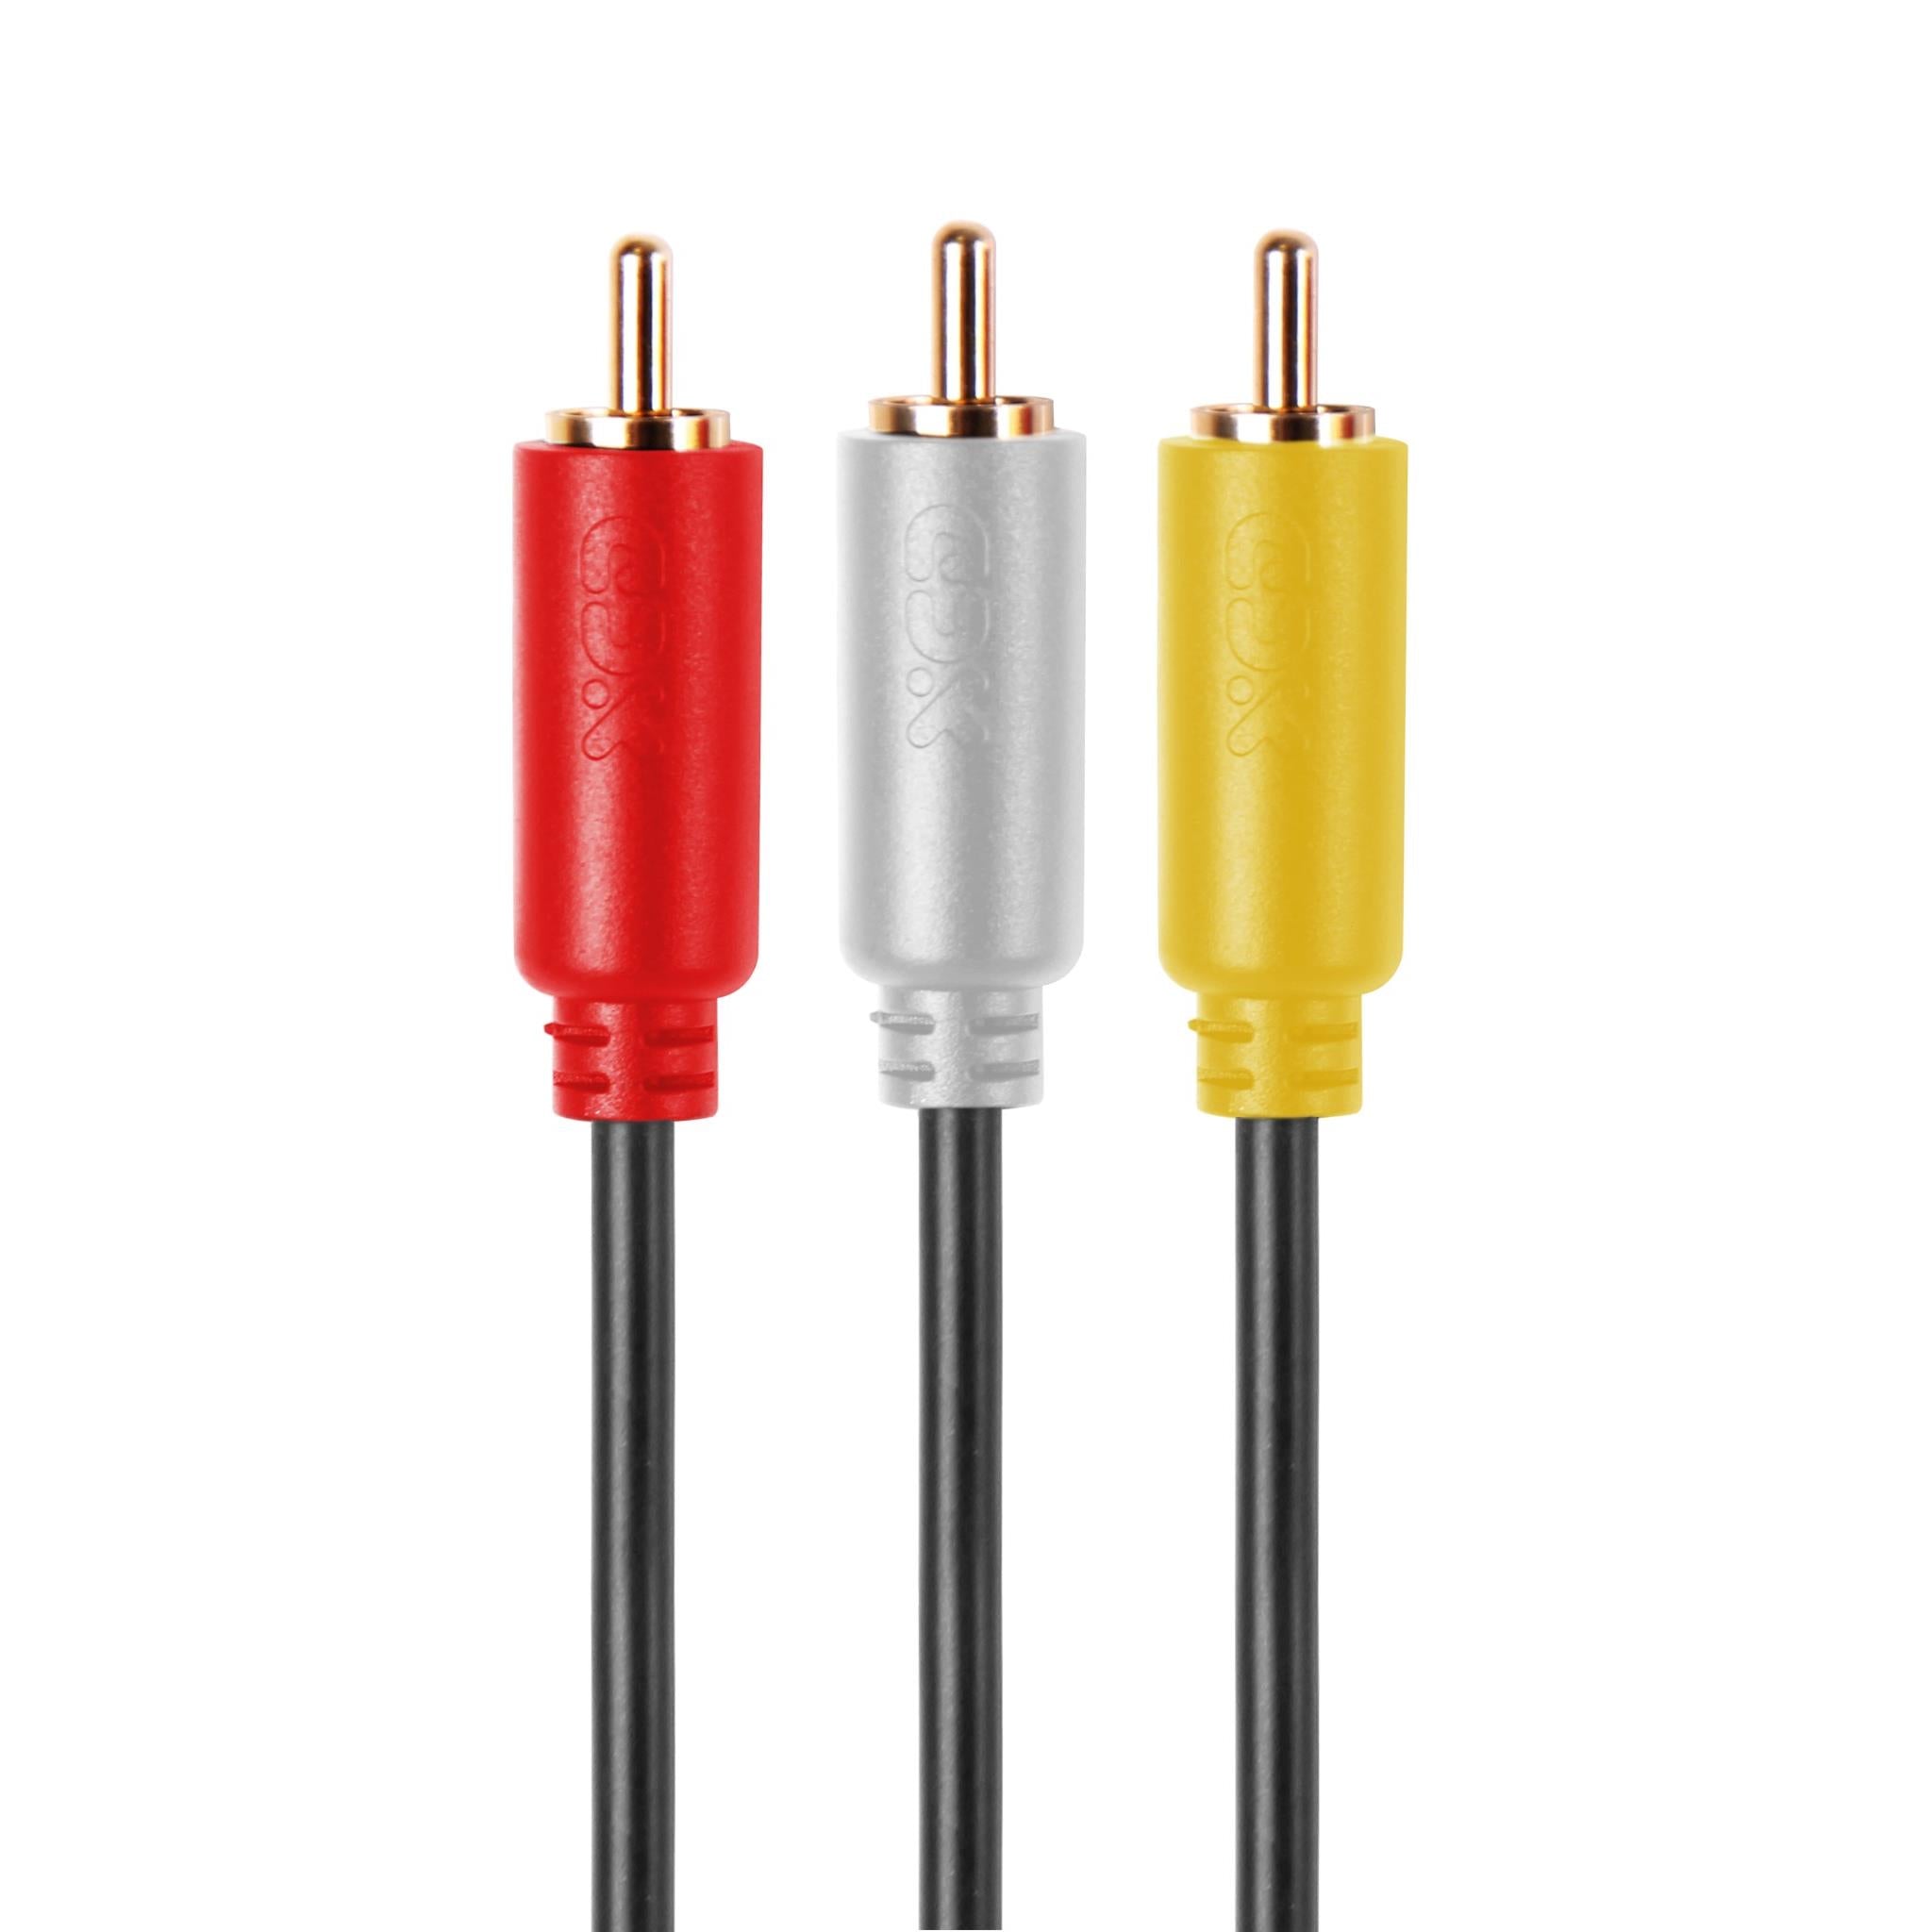 3 RCA Cable (6 FT) - 3RCA AV RCA Composite Video + 2RCA Stereo Audio M/M  Male to Male Dual Shielded RCA Connector Plug Jack Wire Cord